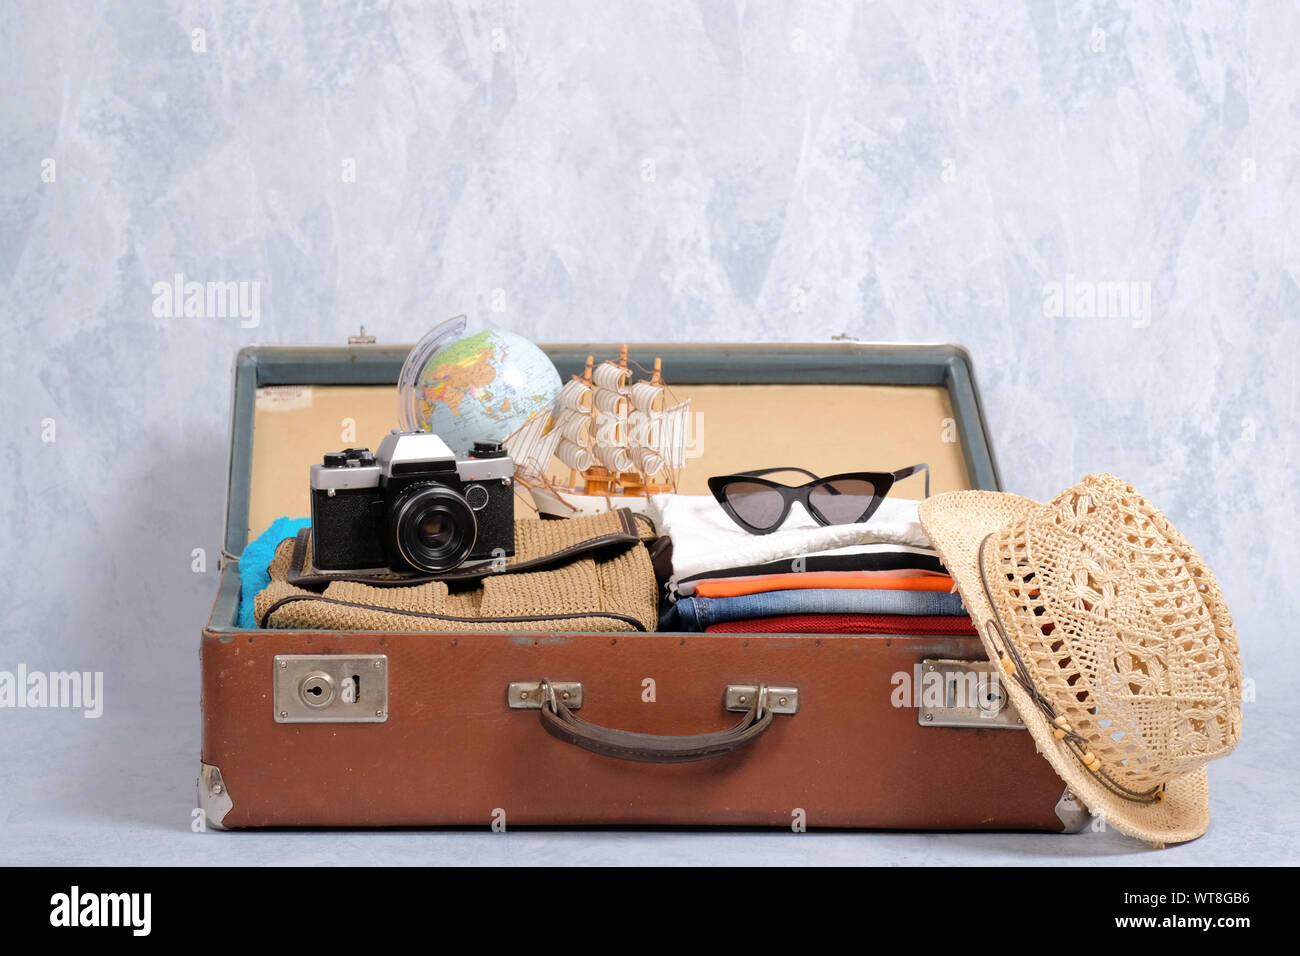 Full travel suitcase on grey background, opened case with travel clothing and accessories. Travel or tourism, vacation, holiday concept Stock Photo